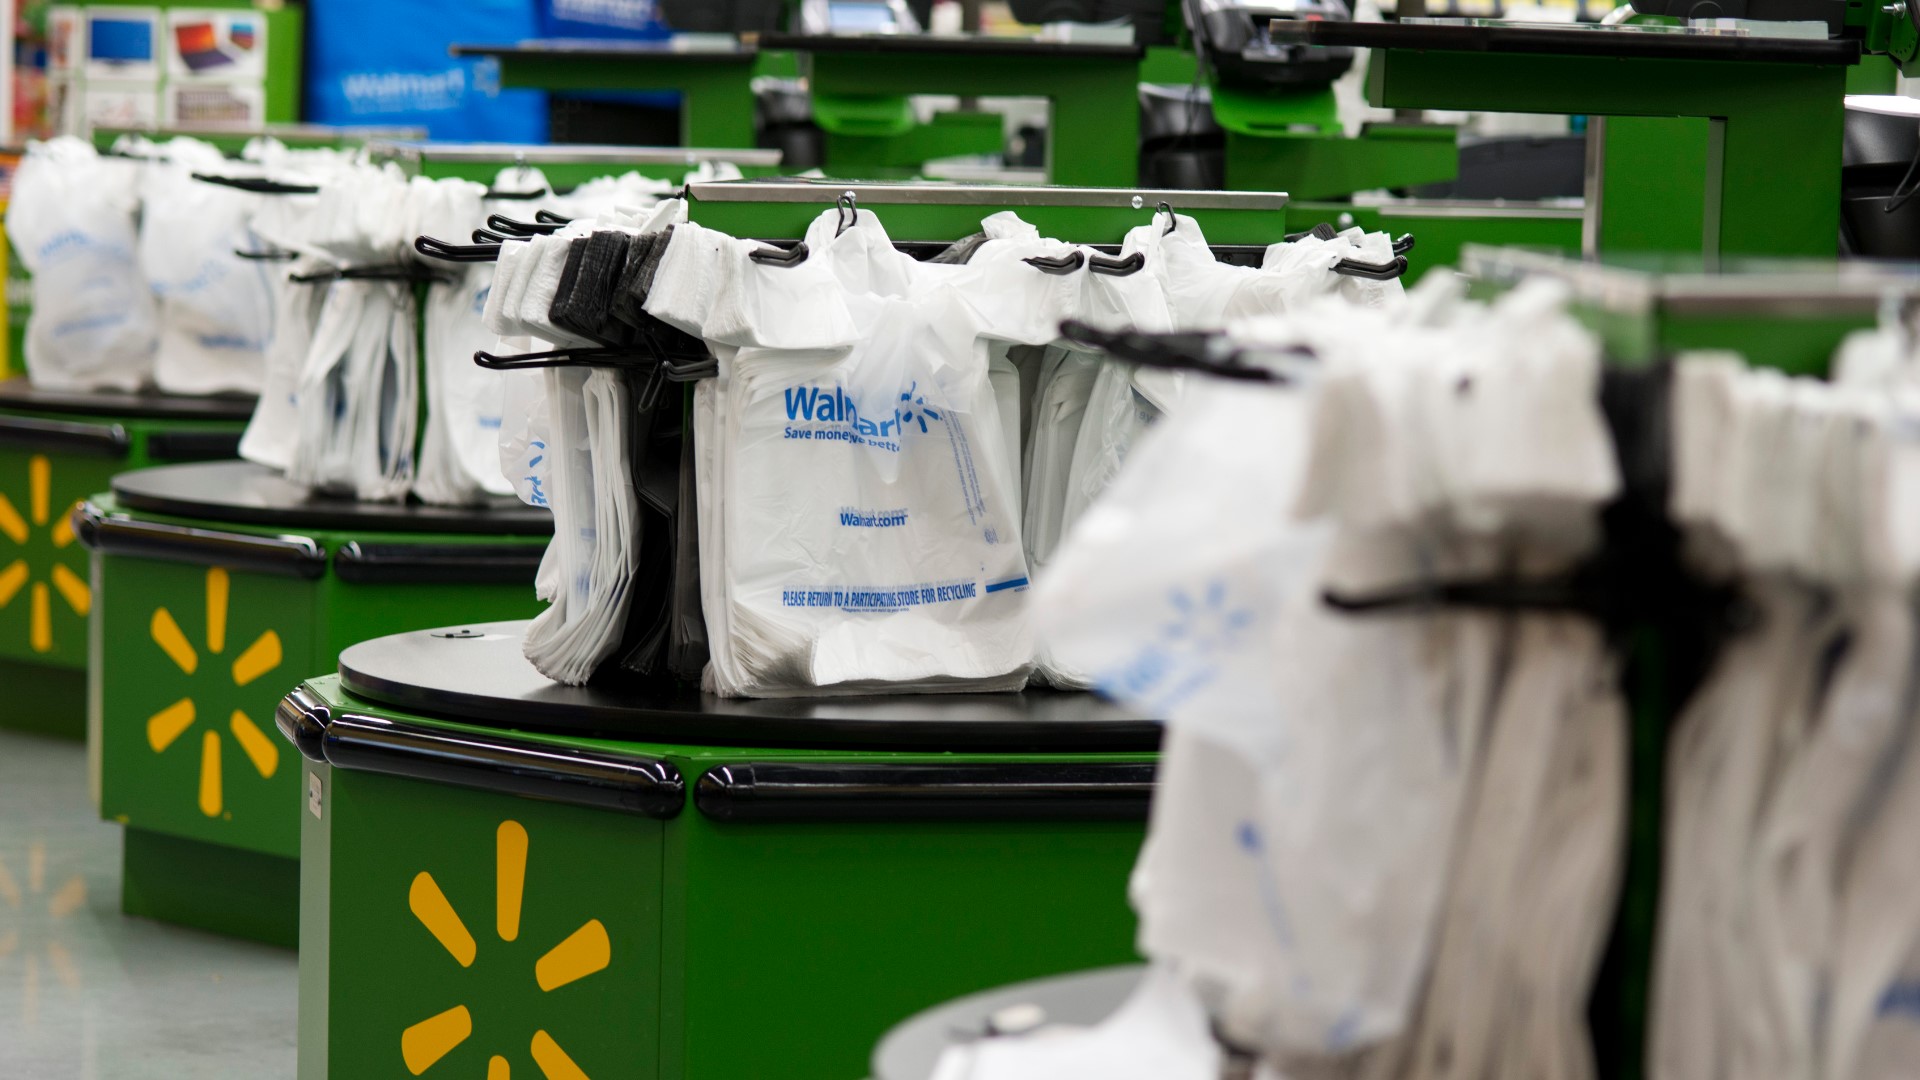 Residents in several areas in Virginia will soon have to start paying for plastic bags at grocery, convenience and drug stores.